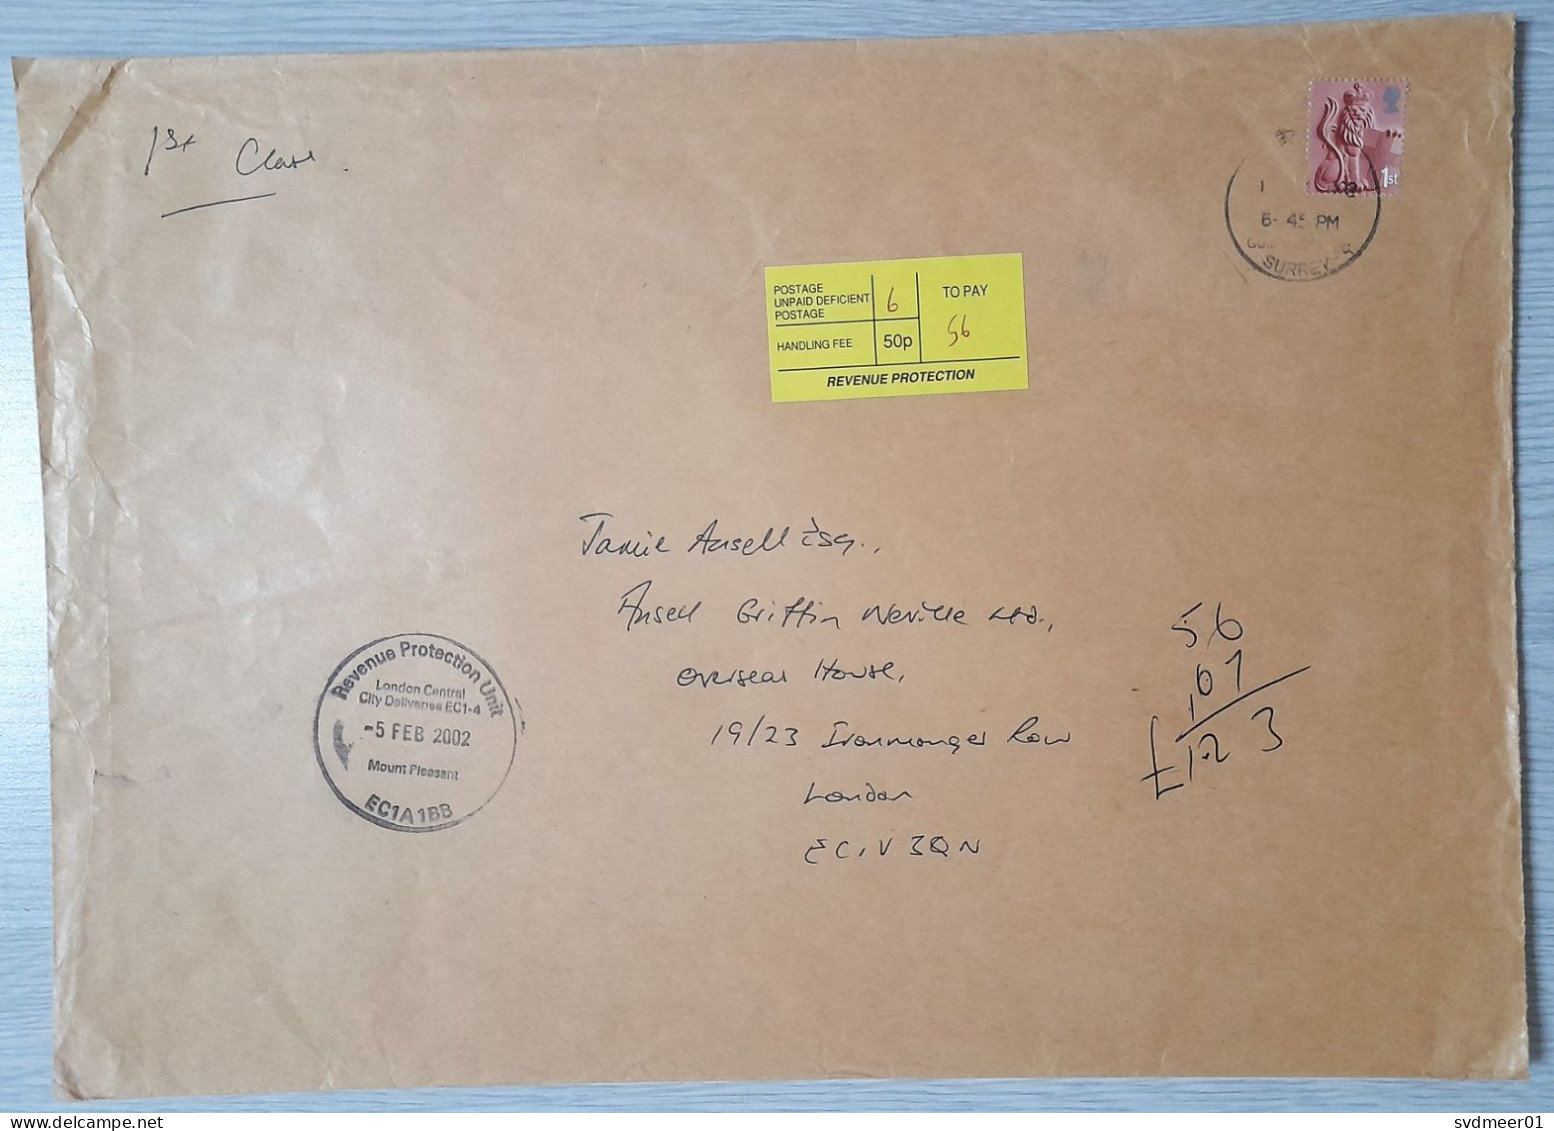 UK: Large Cover, 2002, 1 Stamp, Heraldry, Label & Cancel To Pay, Postage Due, Taxed, Revenue Protection (minor Creases) - Cartas & Documentos